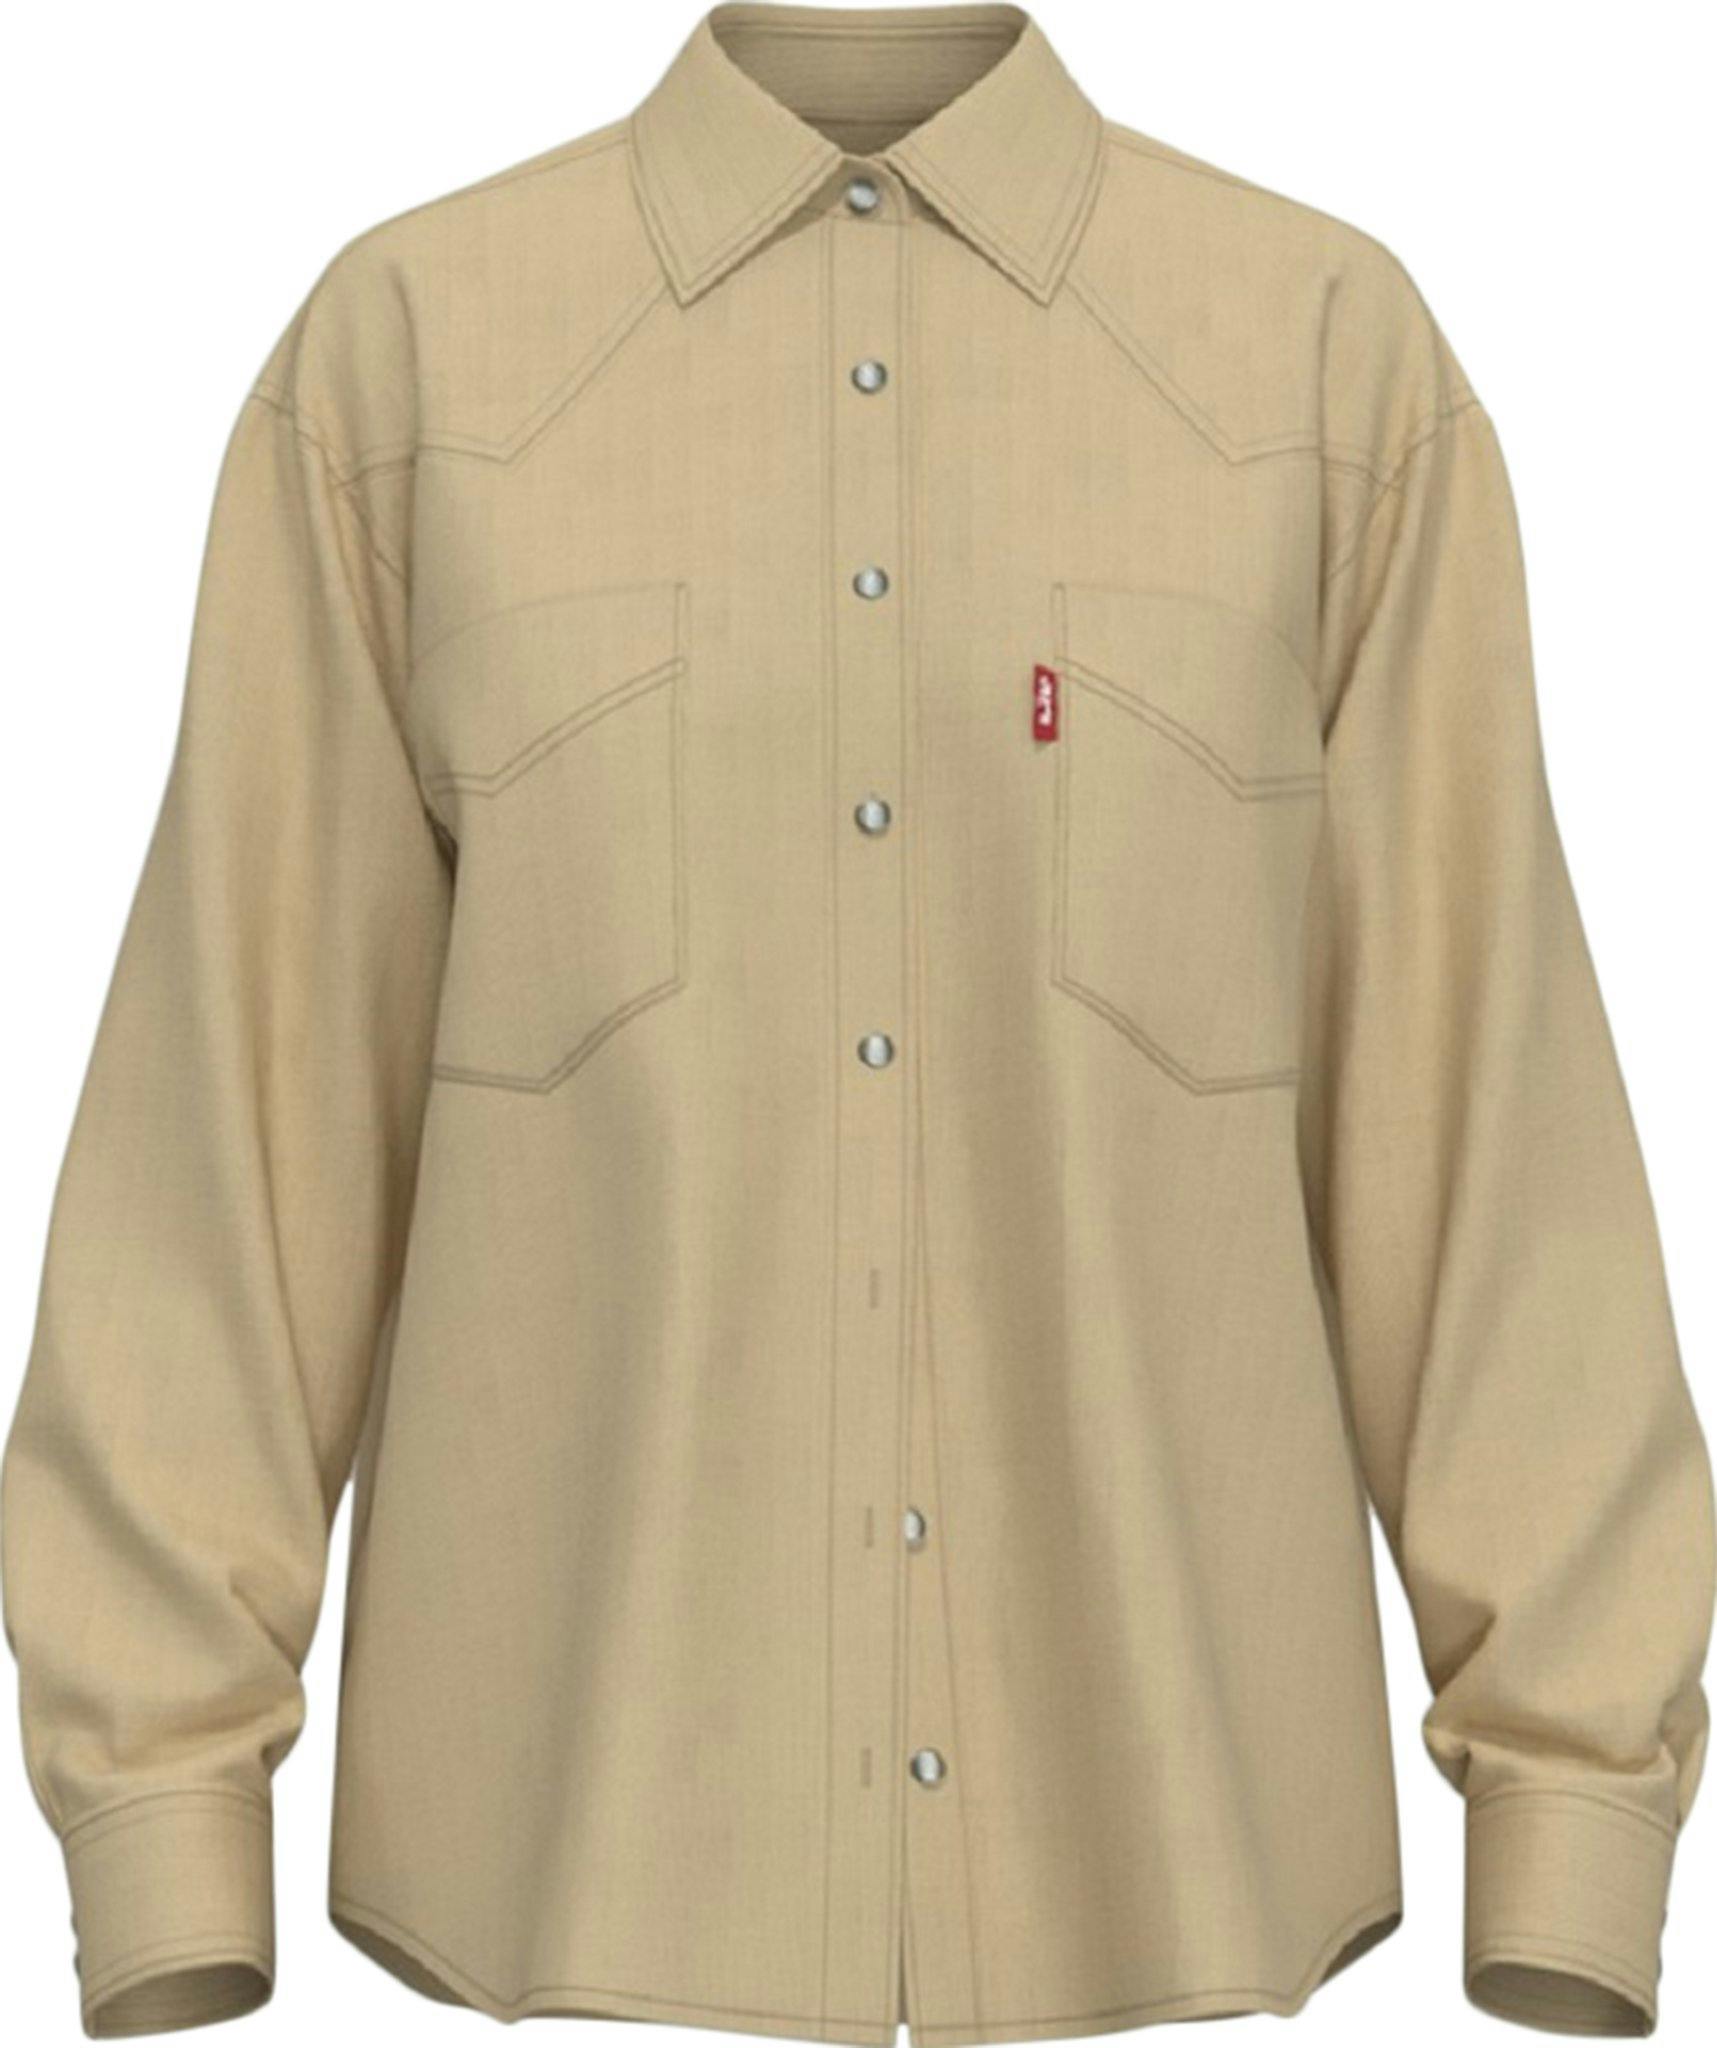 Product image for Donovan Western Shirt - Women's